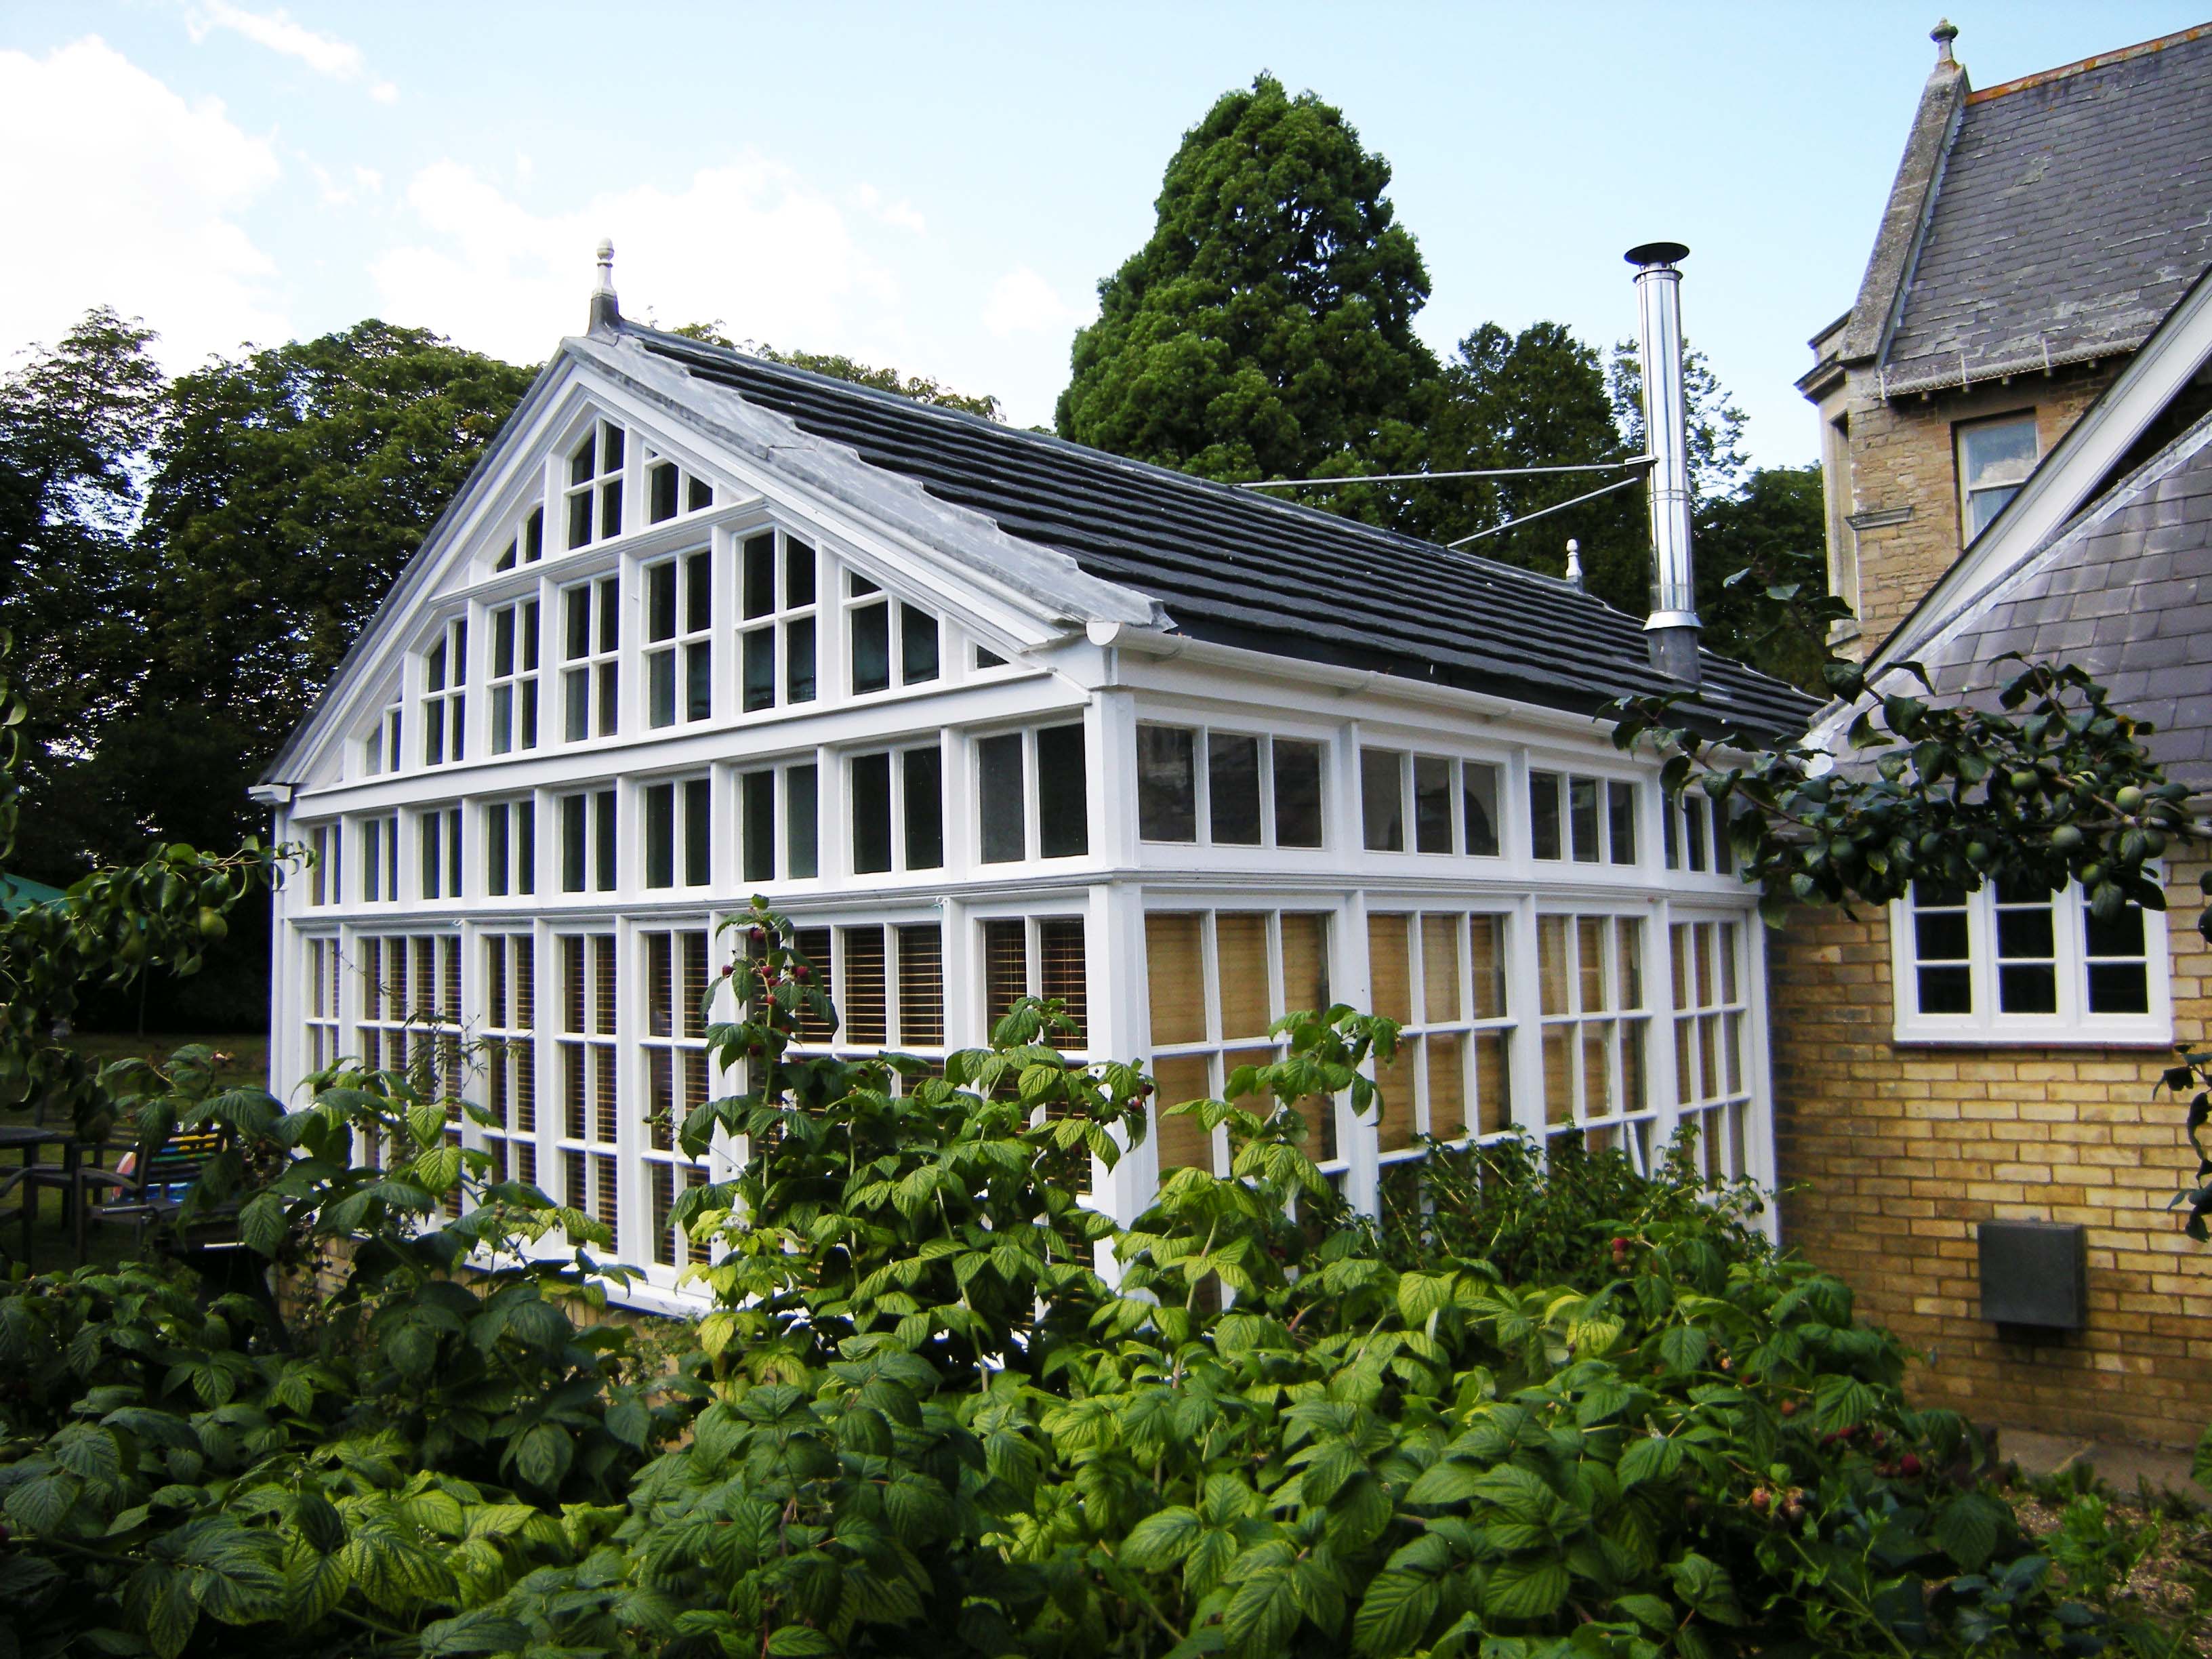 Linden Heritage Listed Property Metrotile Slate in Charcoal Timber Frame Conservatory